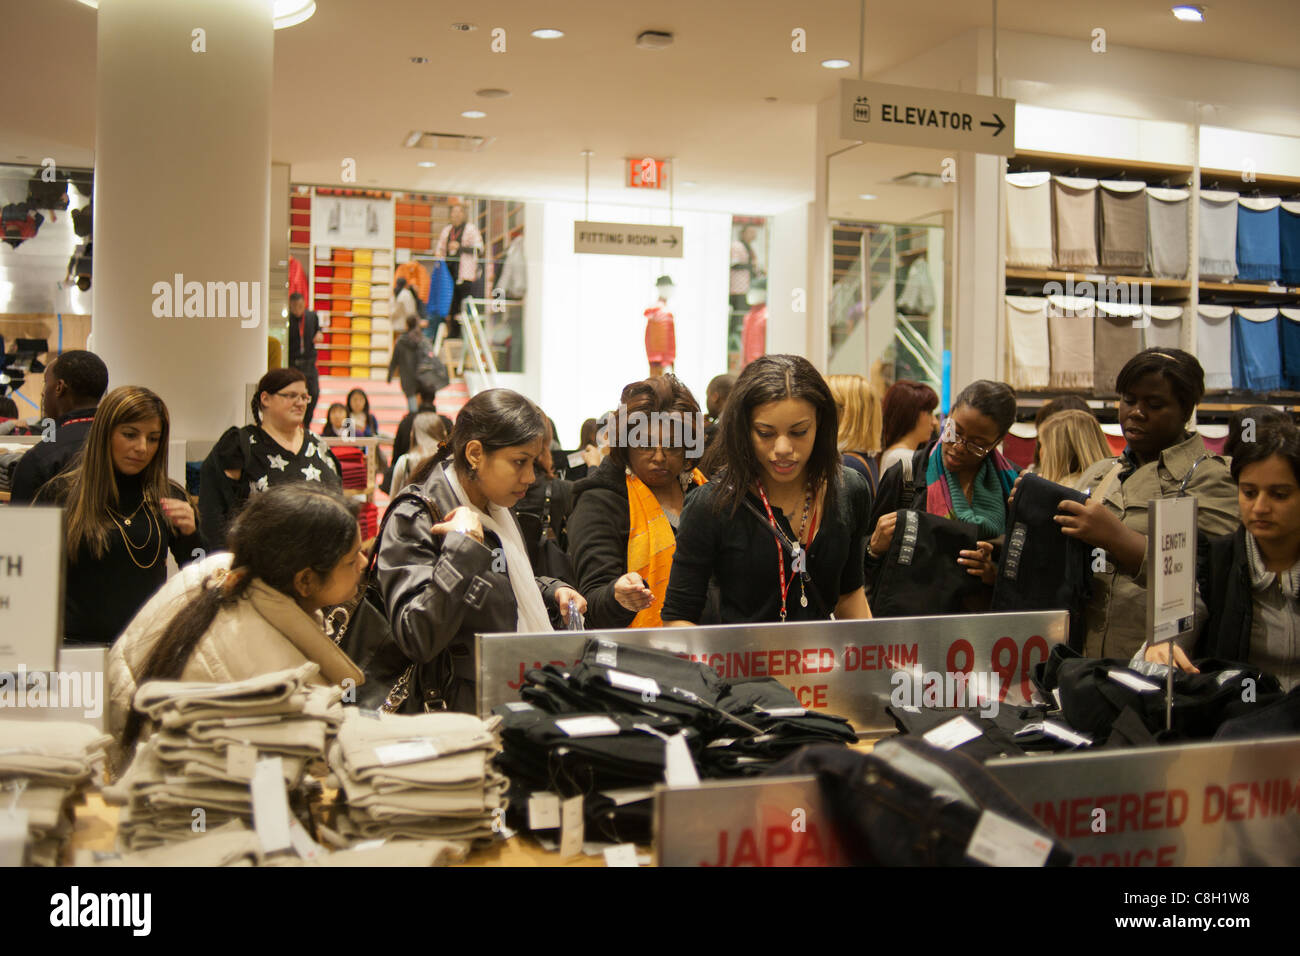 Page 3 - Uniqlo Store High Resolution Stock Photography and Images - Alamy